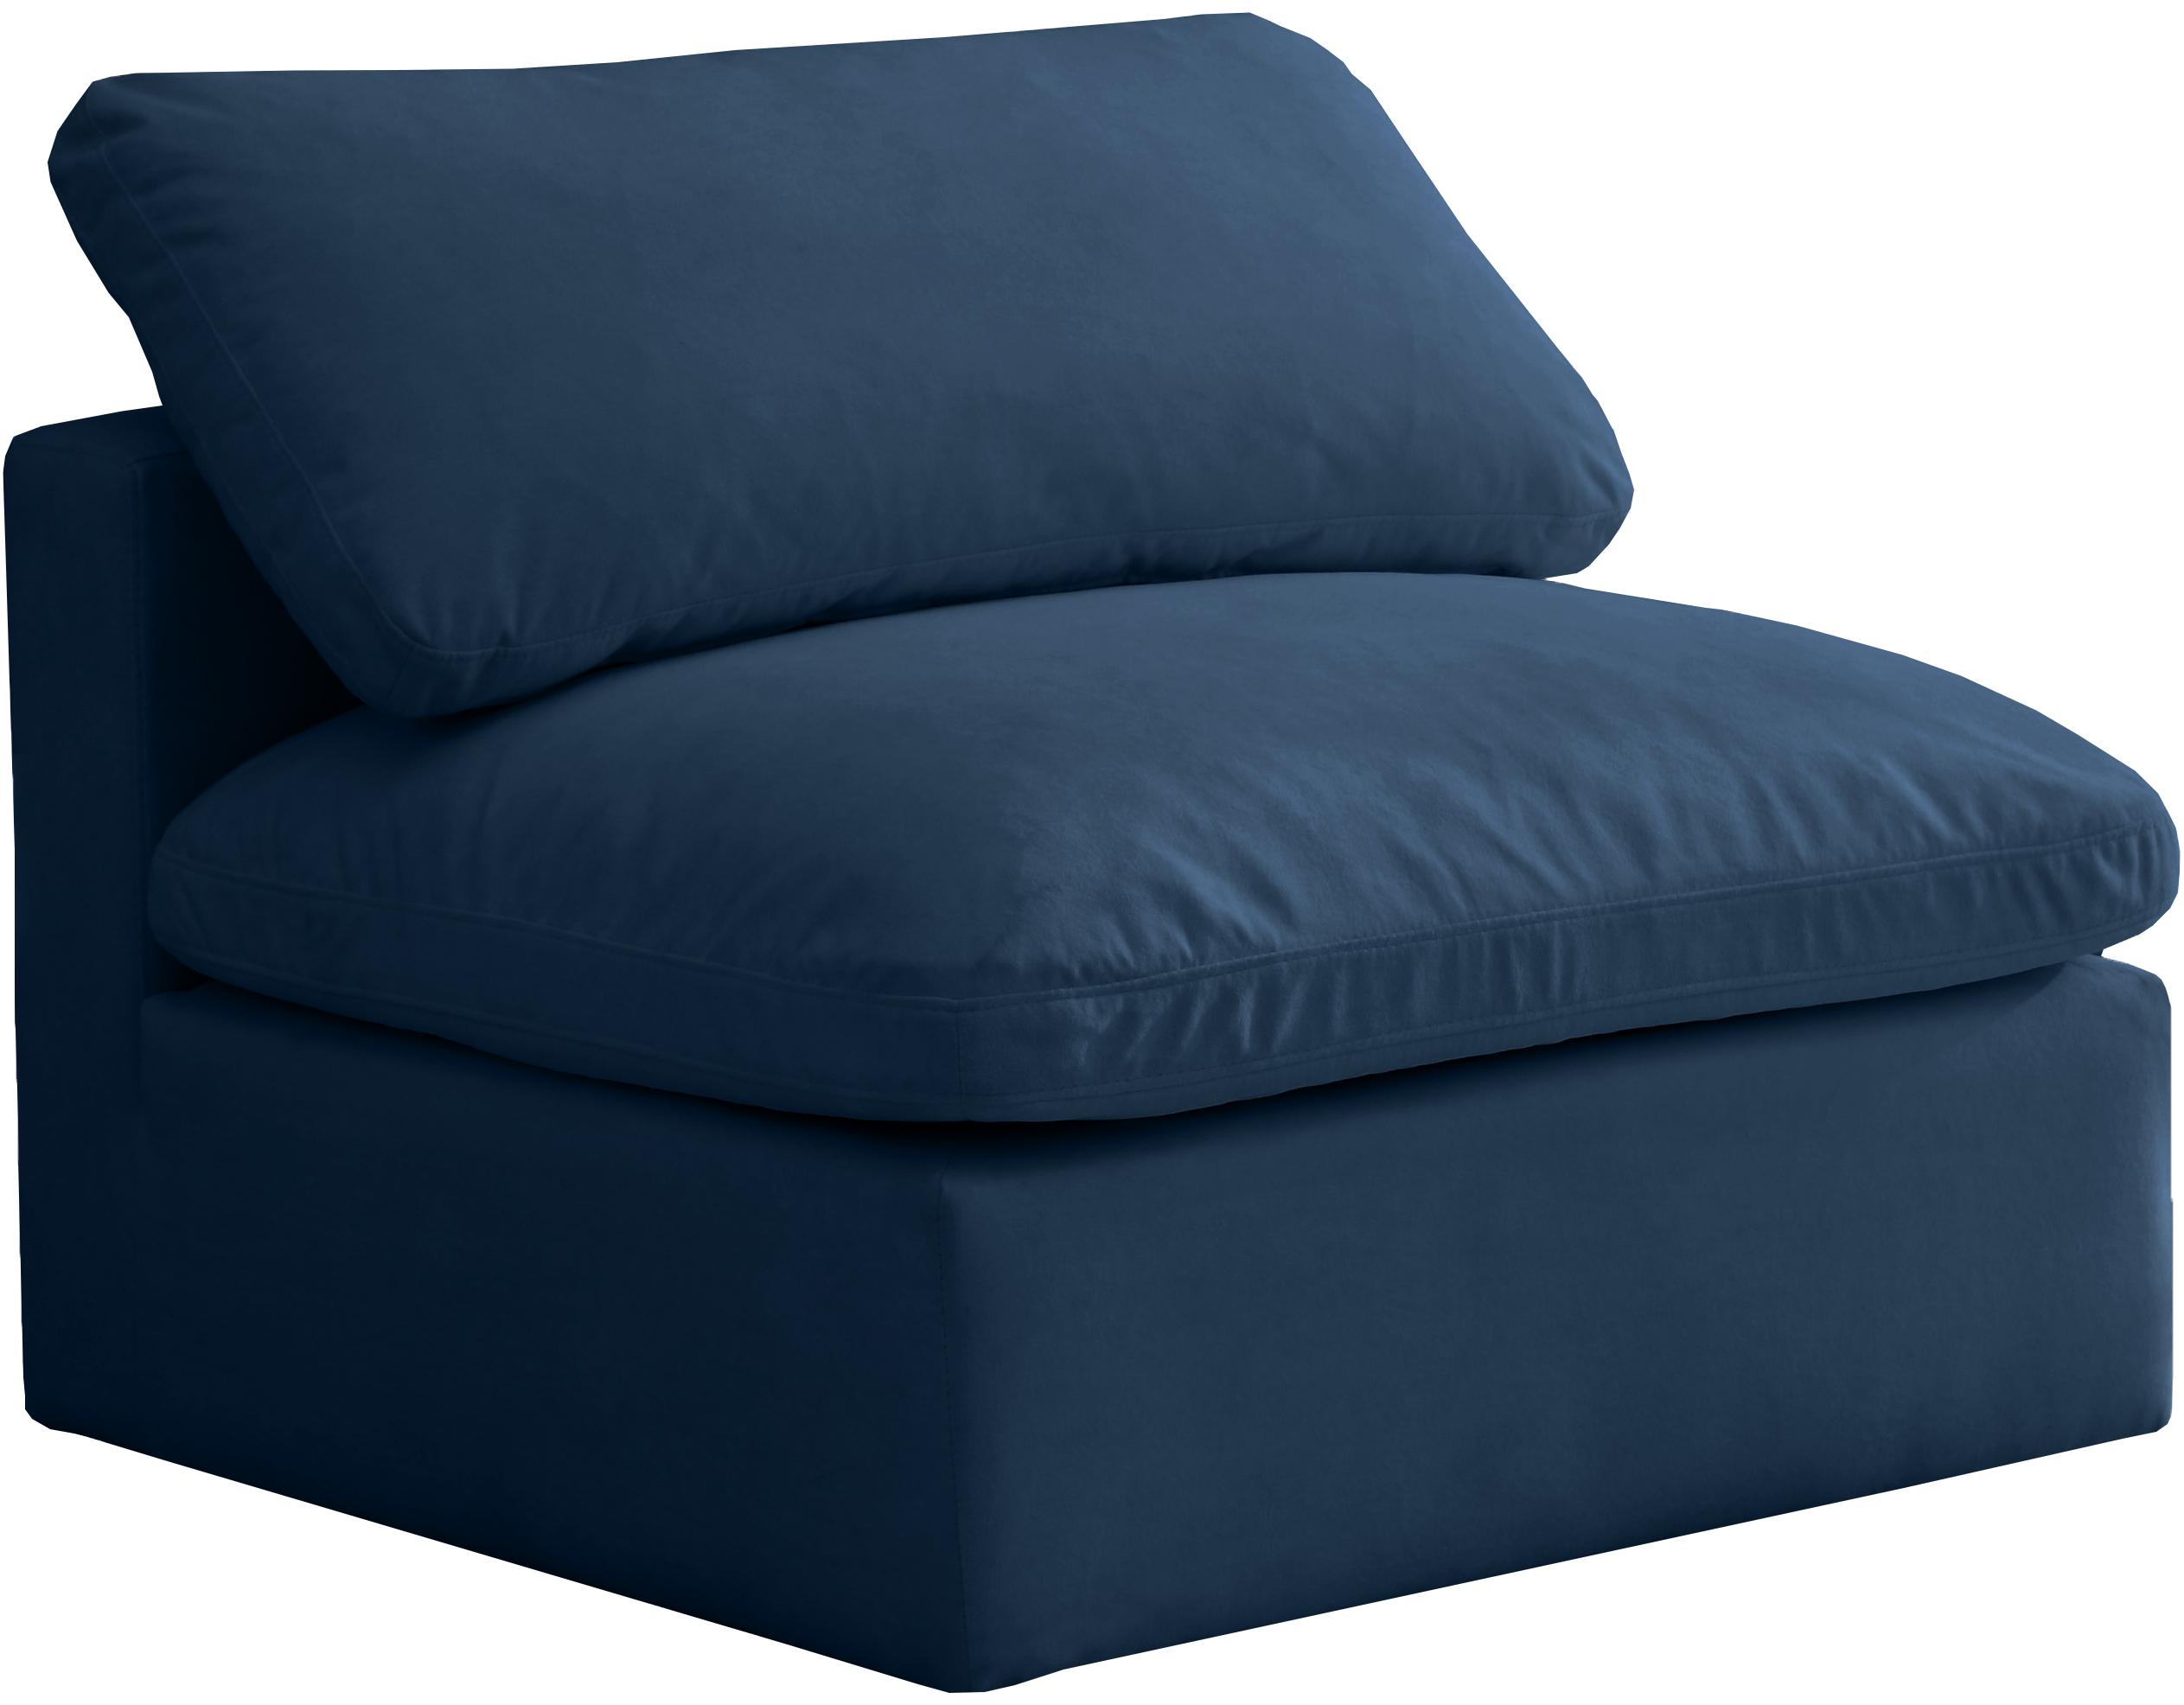 Contemporary, Modern Oversized Chair 602Navy-Armless 602Navy-Armless in Navy Fabric